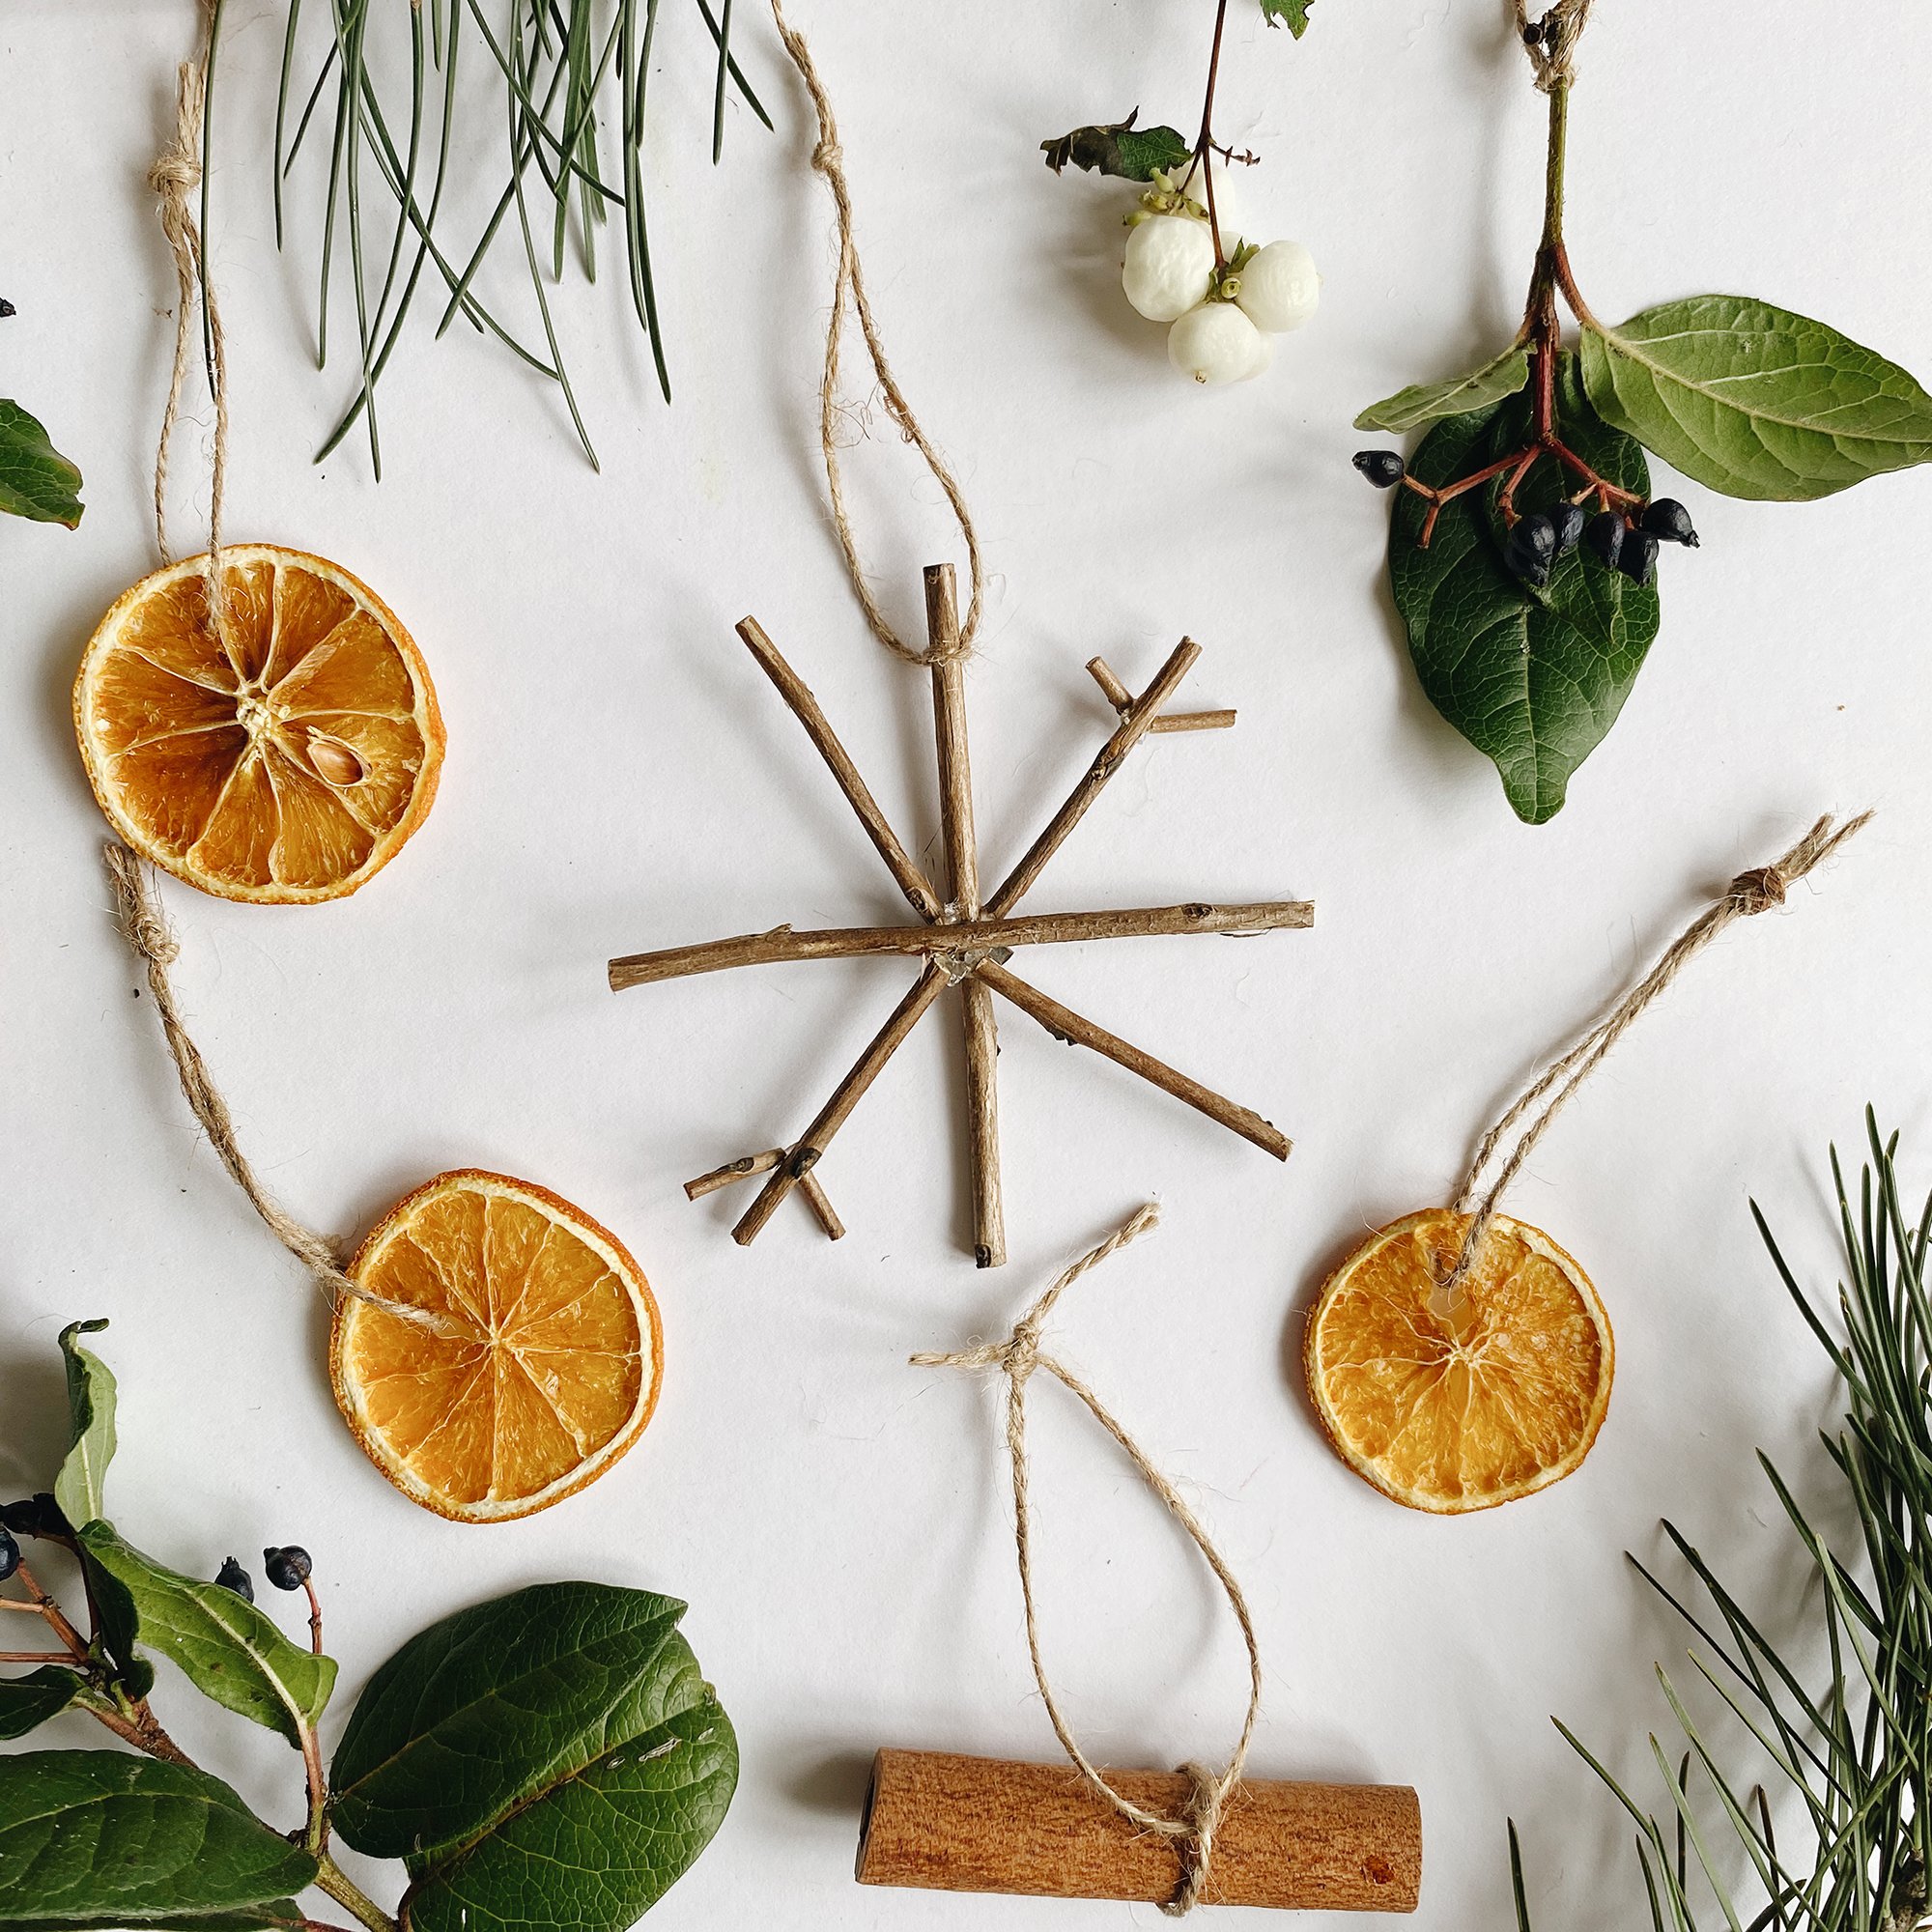 How to Make Natural Christmas Decorations | Hobbycraft